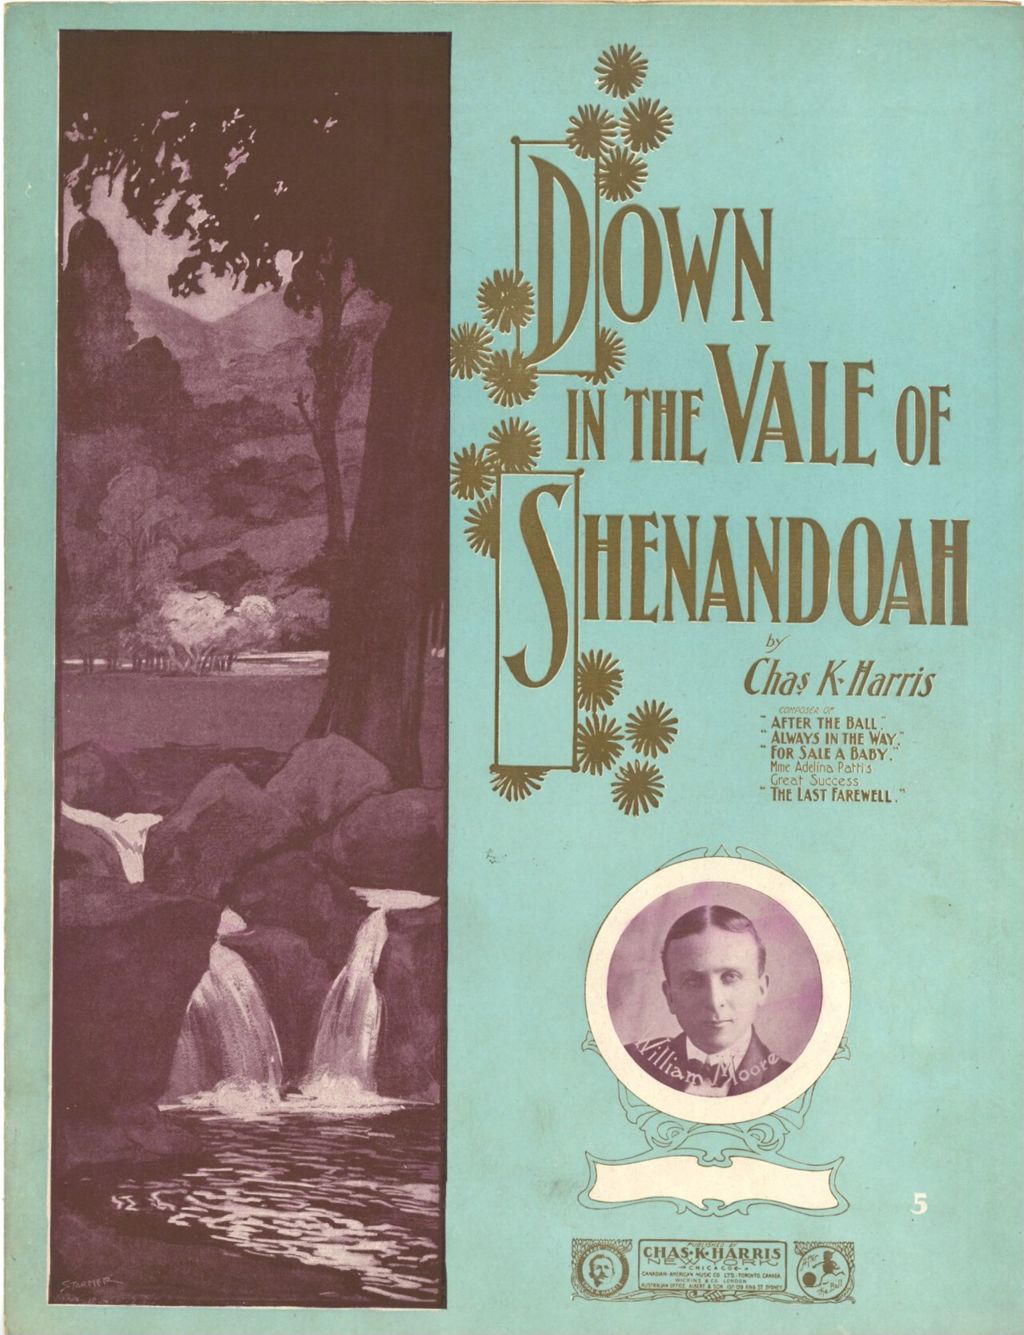 Down in the Vale of Shenandoah